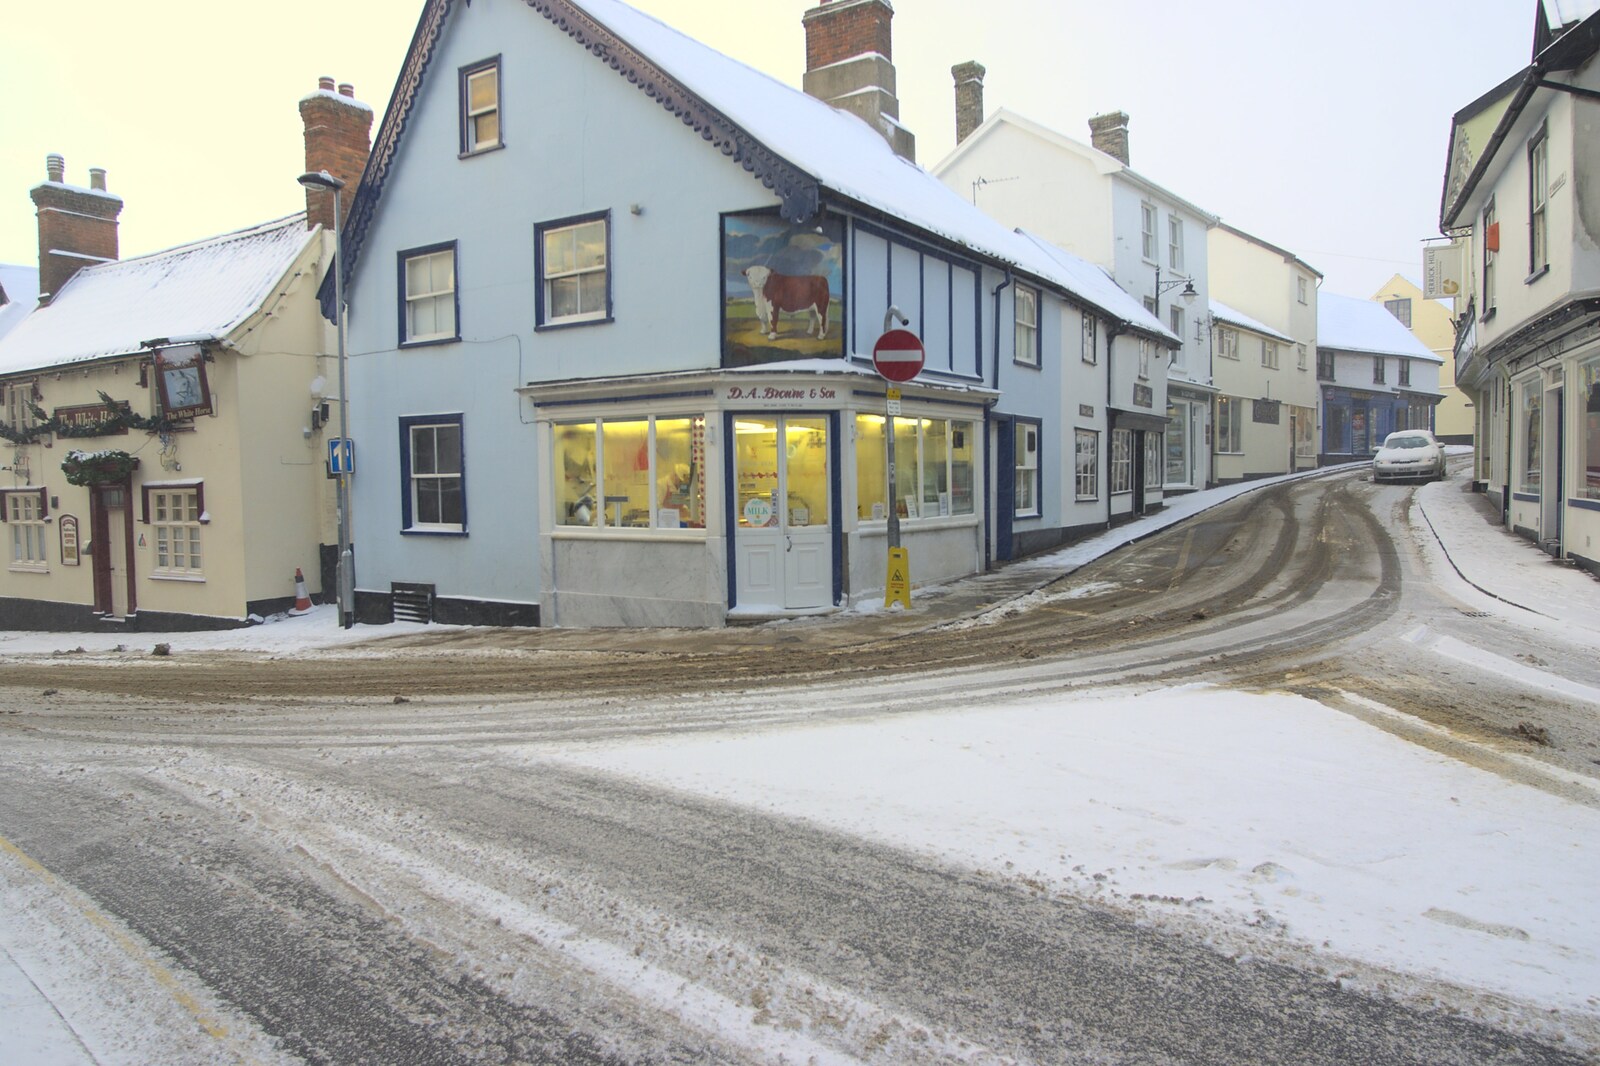 A Snowy Miscellany, Diss, Norfolk - 9th January 2010: Browne's the butchers is already up and open